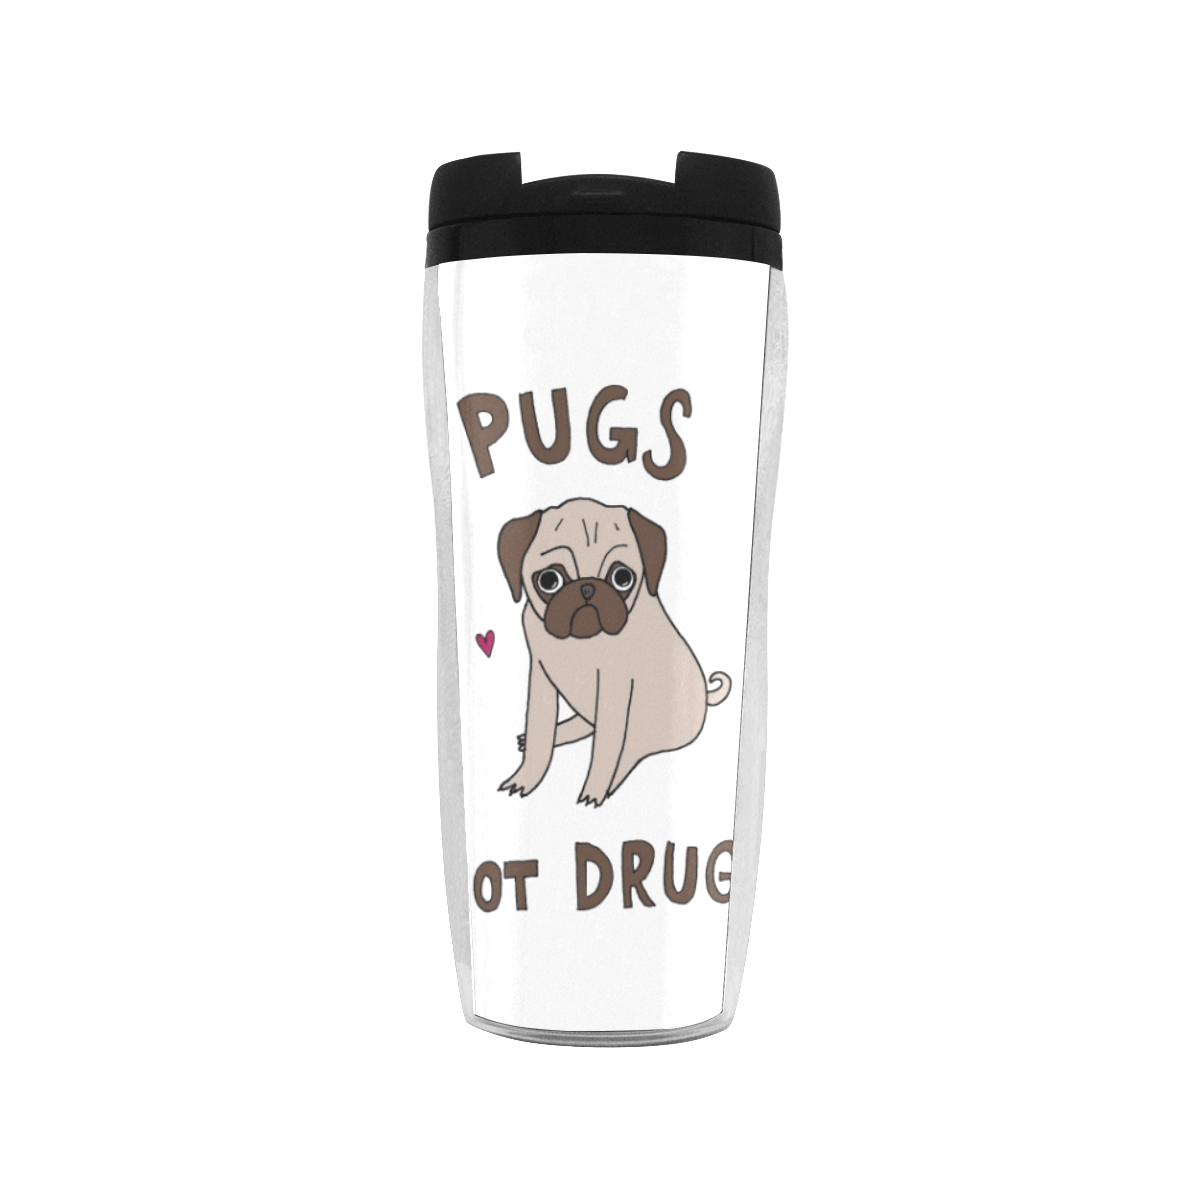 PUGS NOT DRUGS Reusable Coffee Cup (11.8oz)